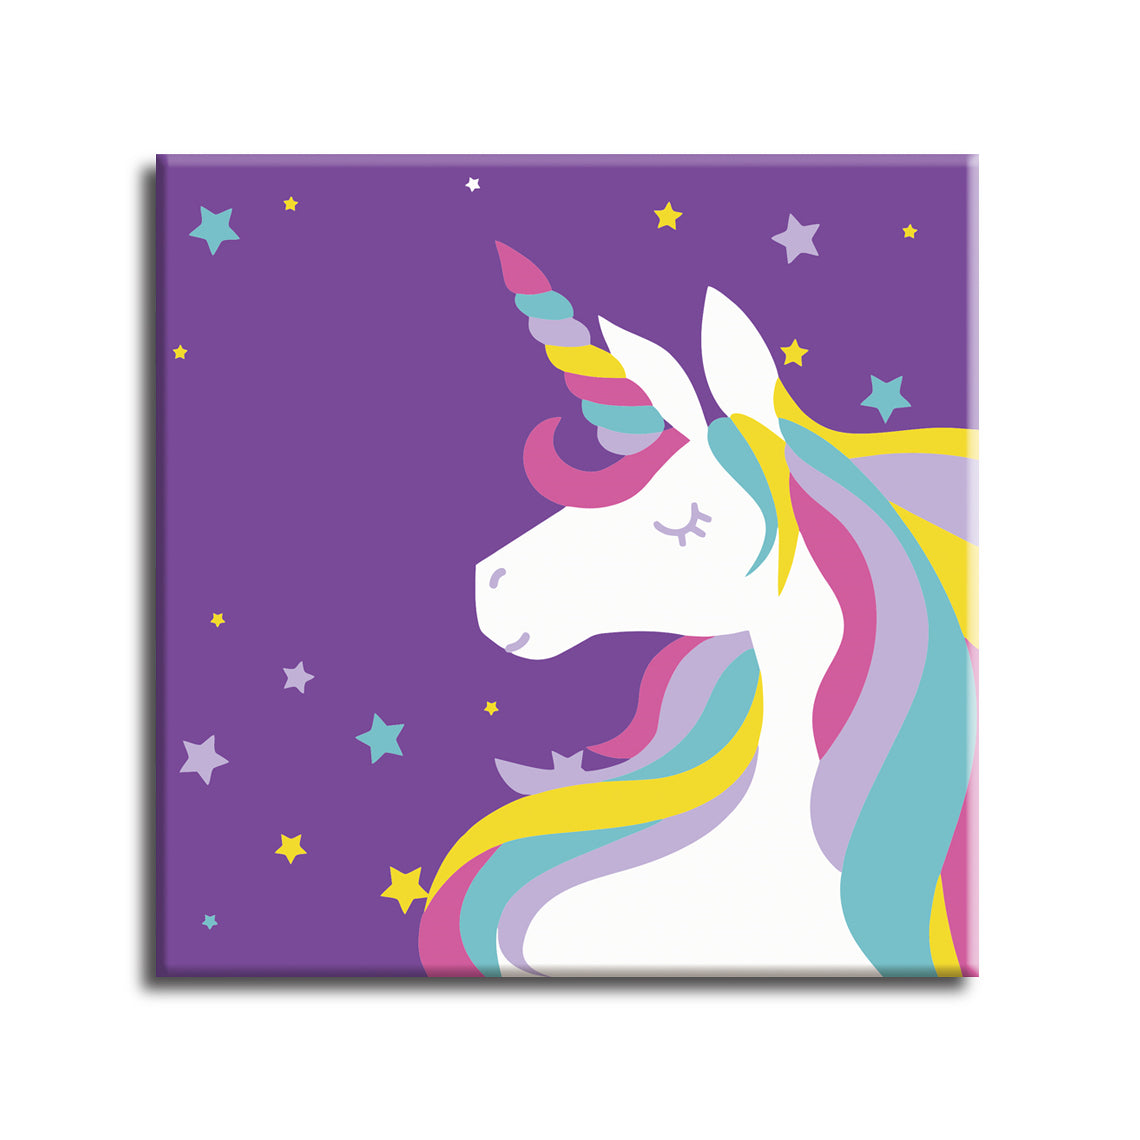 Colorful Unicorn - Paint by Numbers Kit for Adults DIY Oil Painting Kit on  Canvas